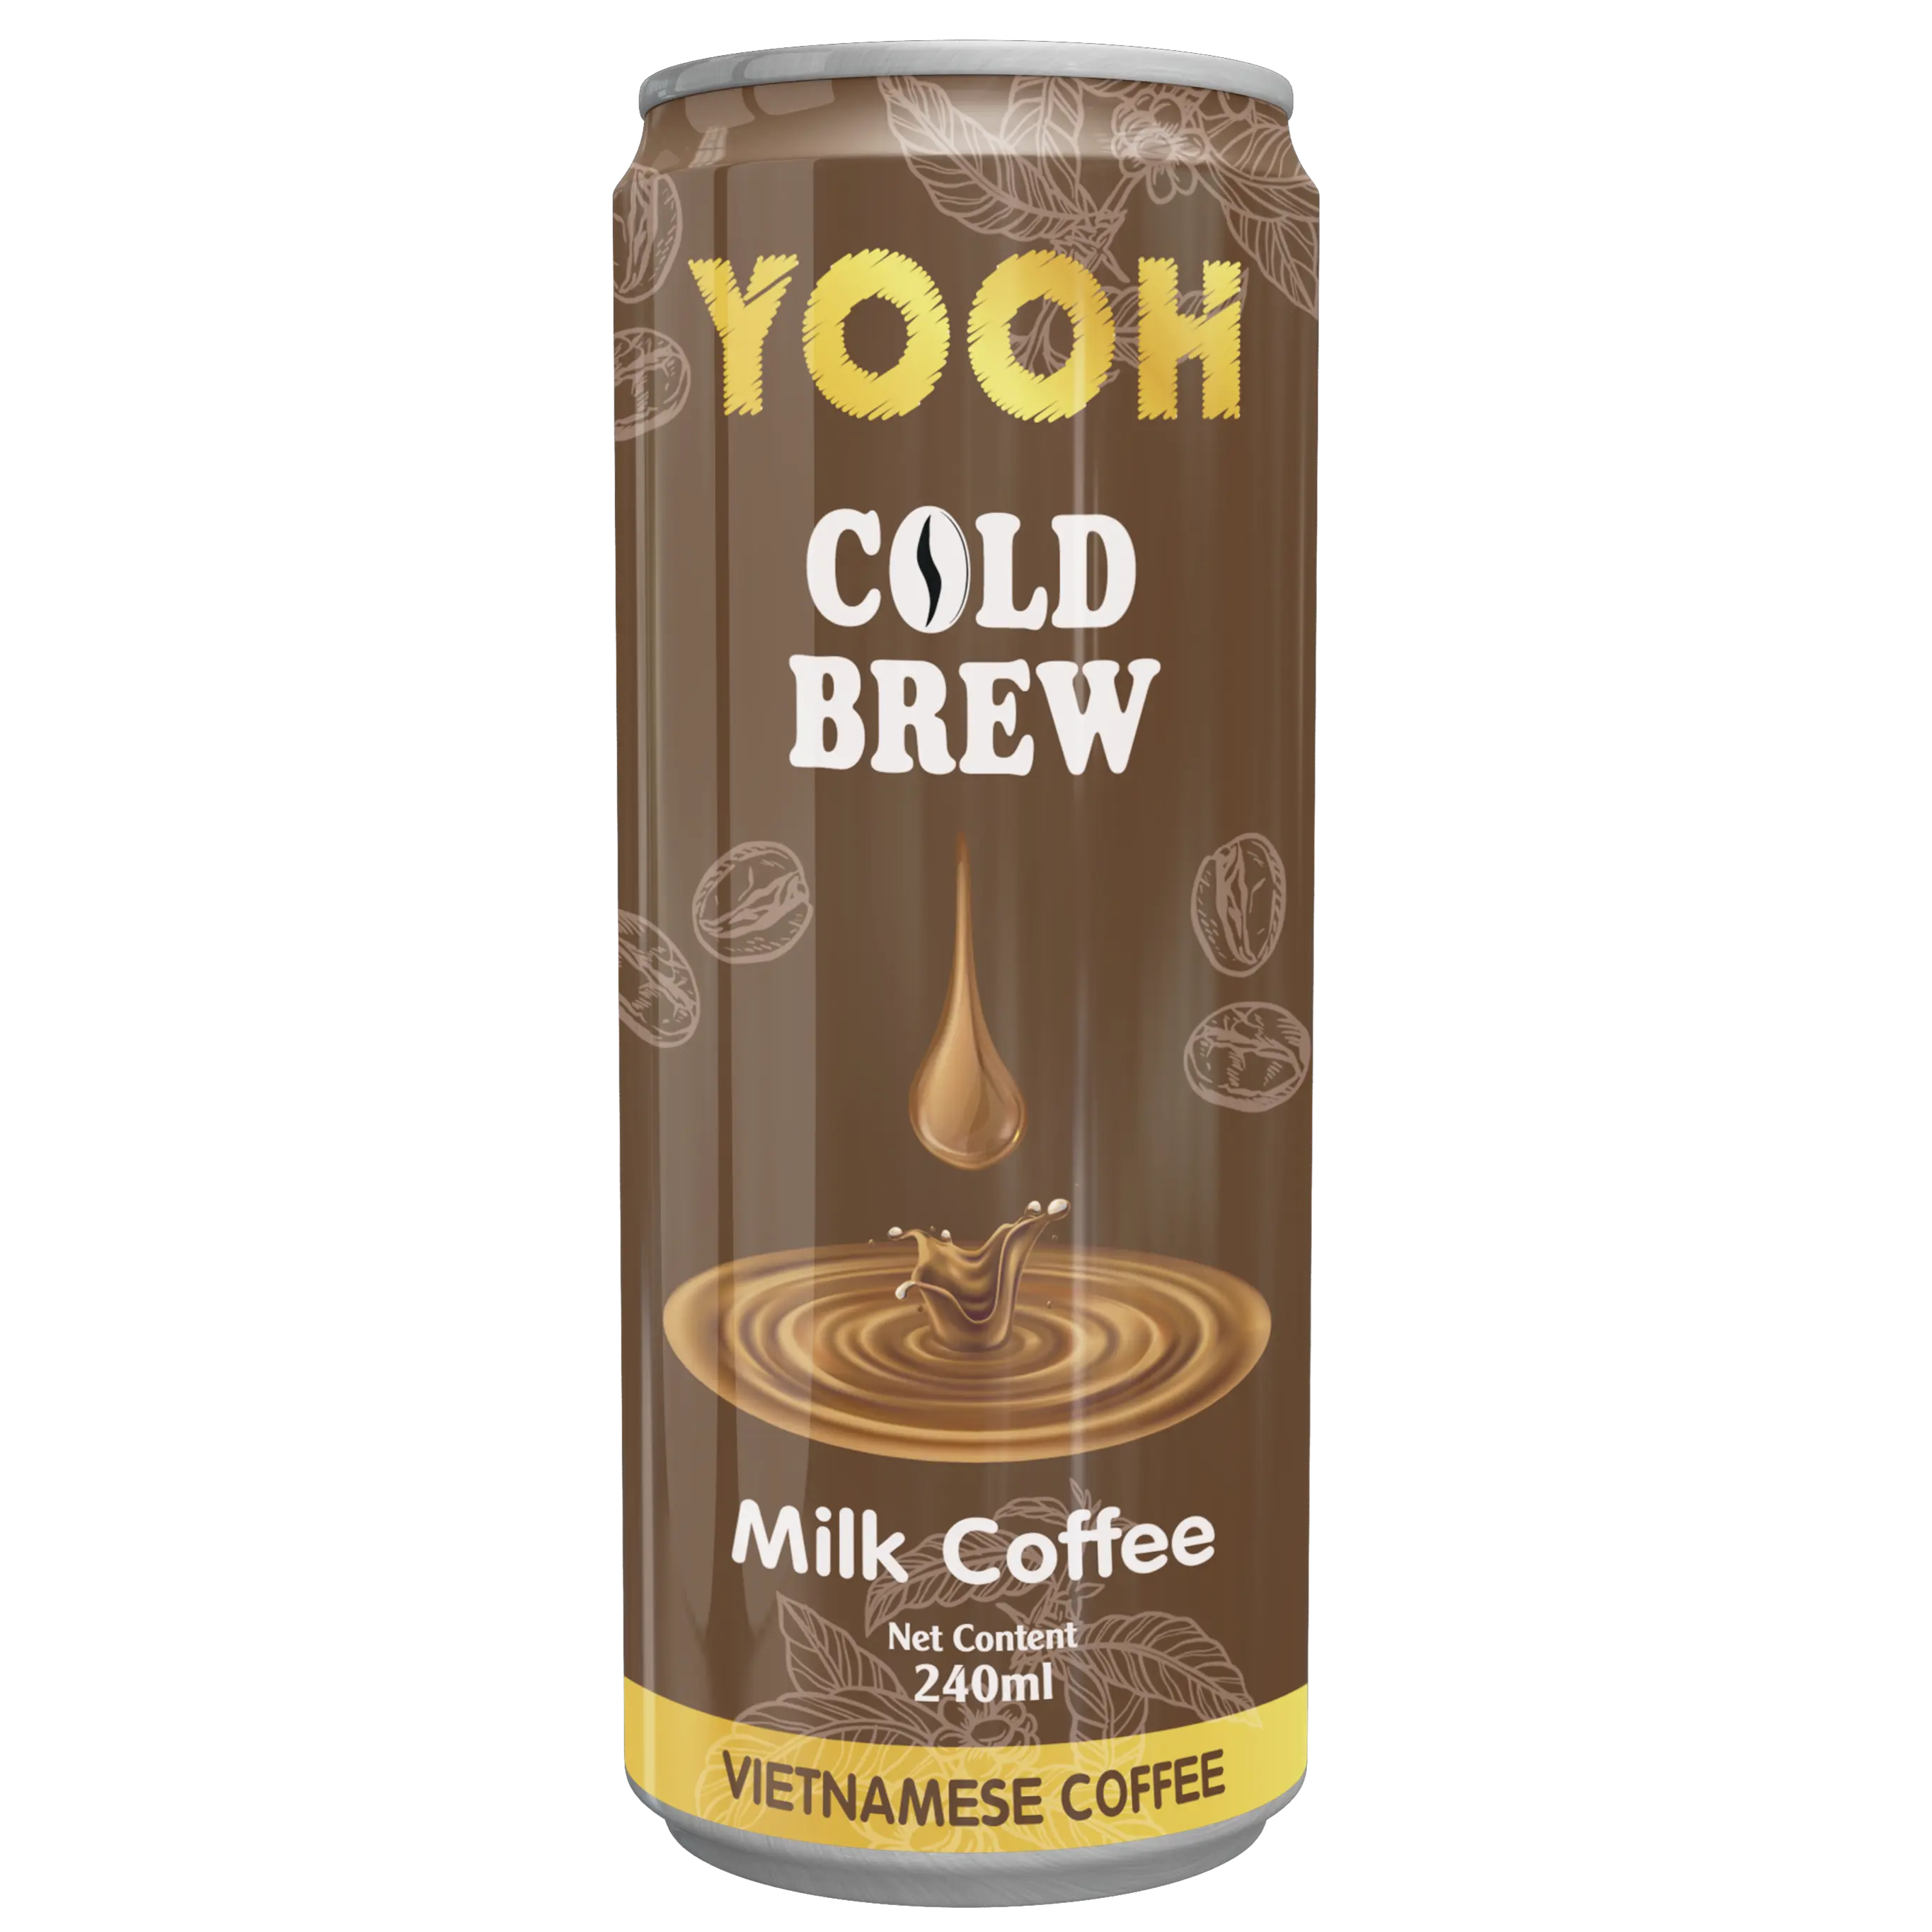 YOOH - COLD BREW Vietnamese Milk Coffee 240ml RTD beverage slim tin can for wholesale & export with affordable price